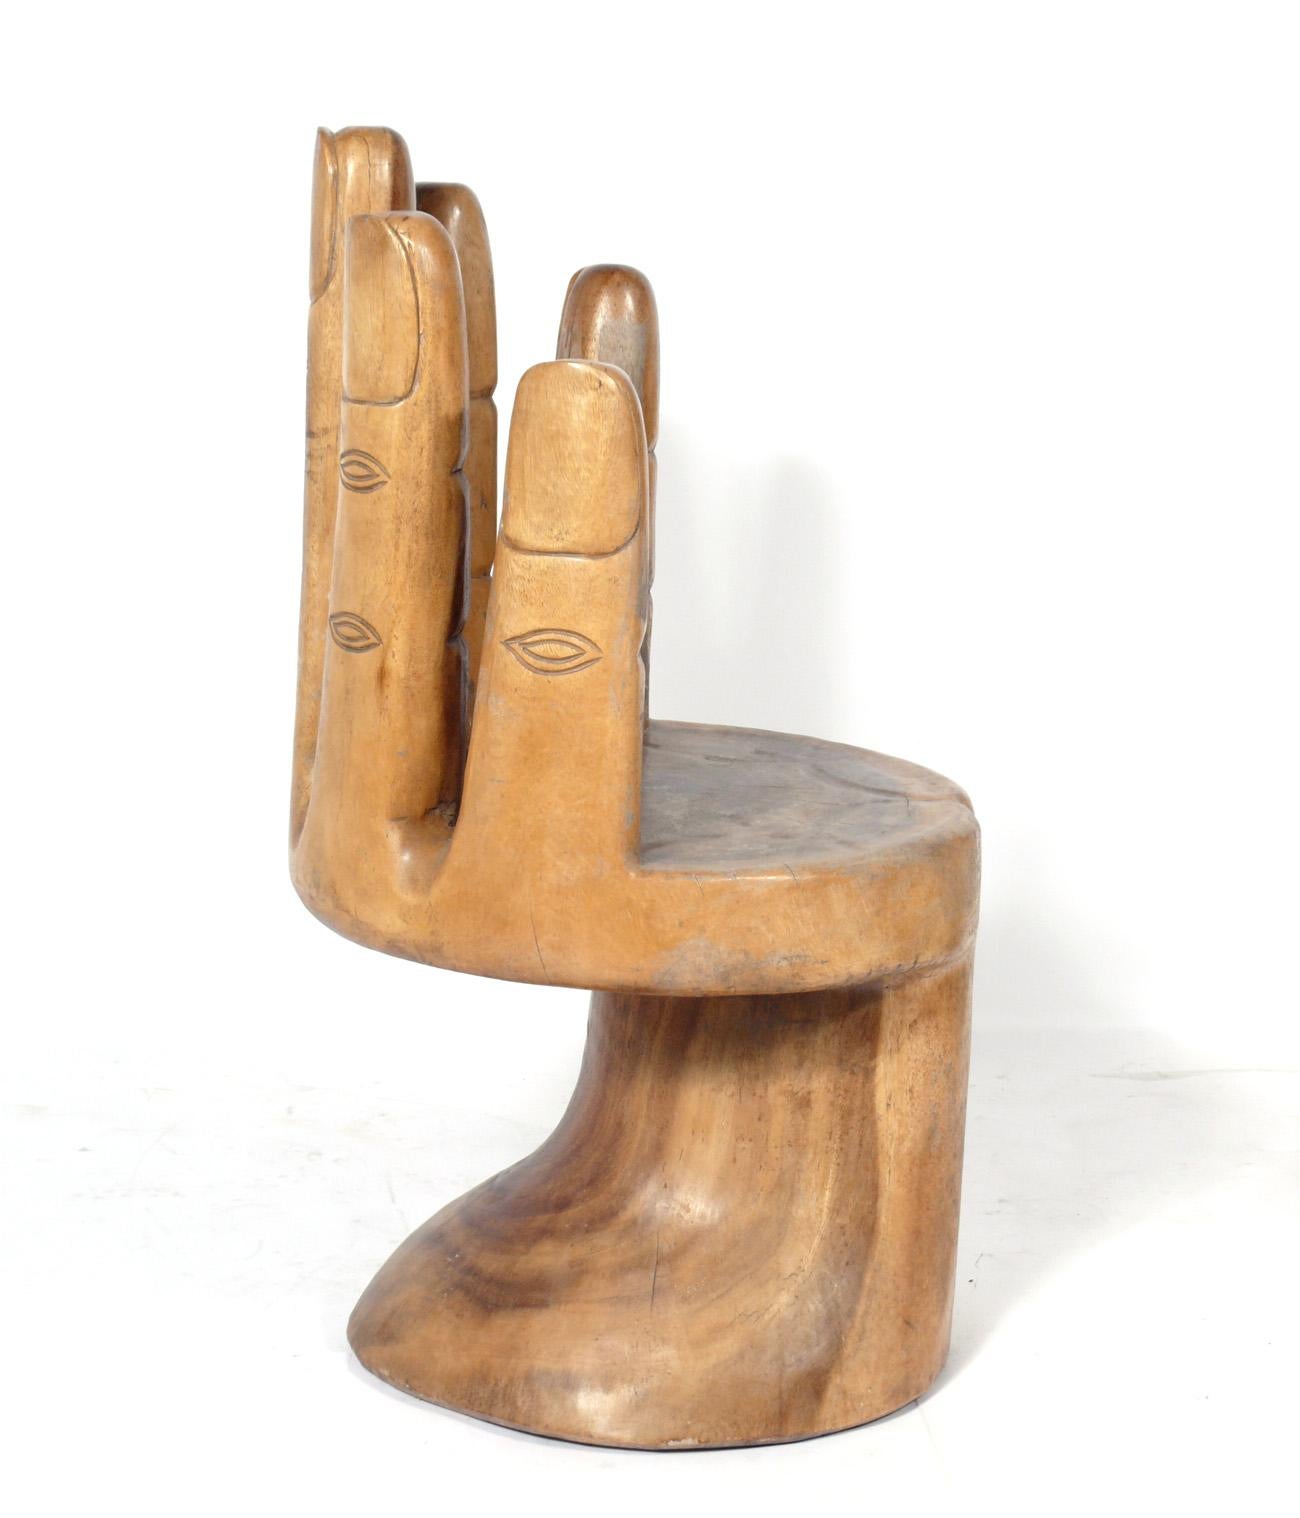 Mexican Sculptural Wooden Hand Chair in the Manner of Pedro Friedeberg